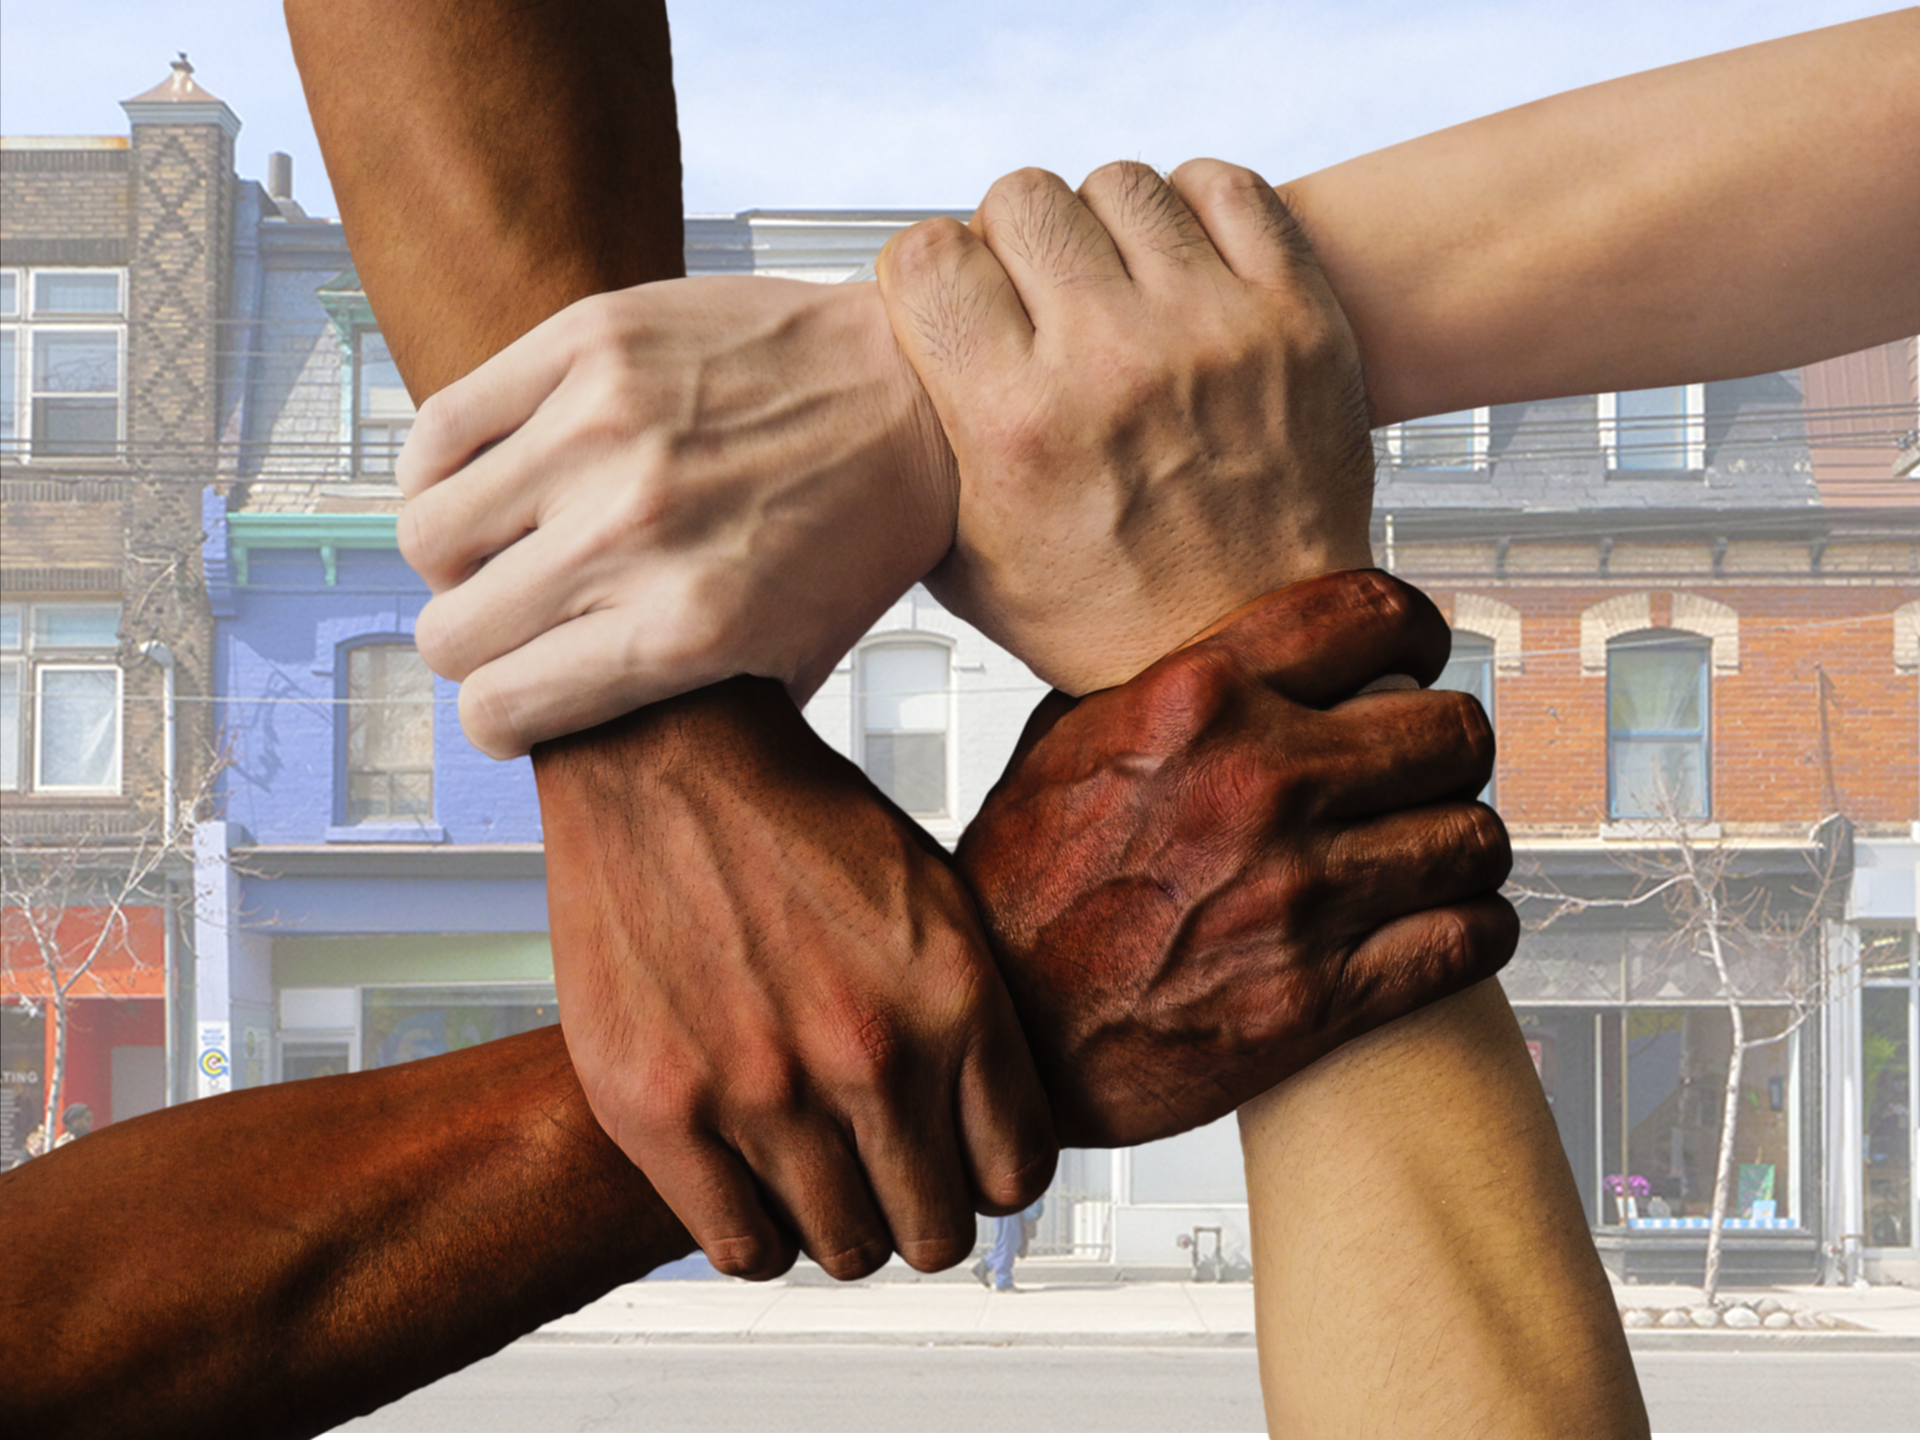 Hands of different skin tones clasping in front of a city streetscape.